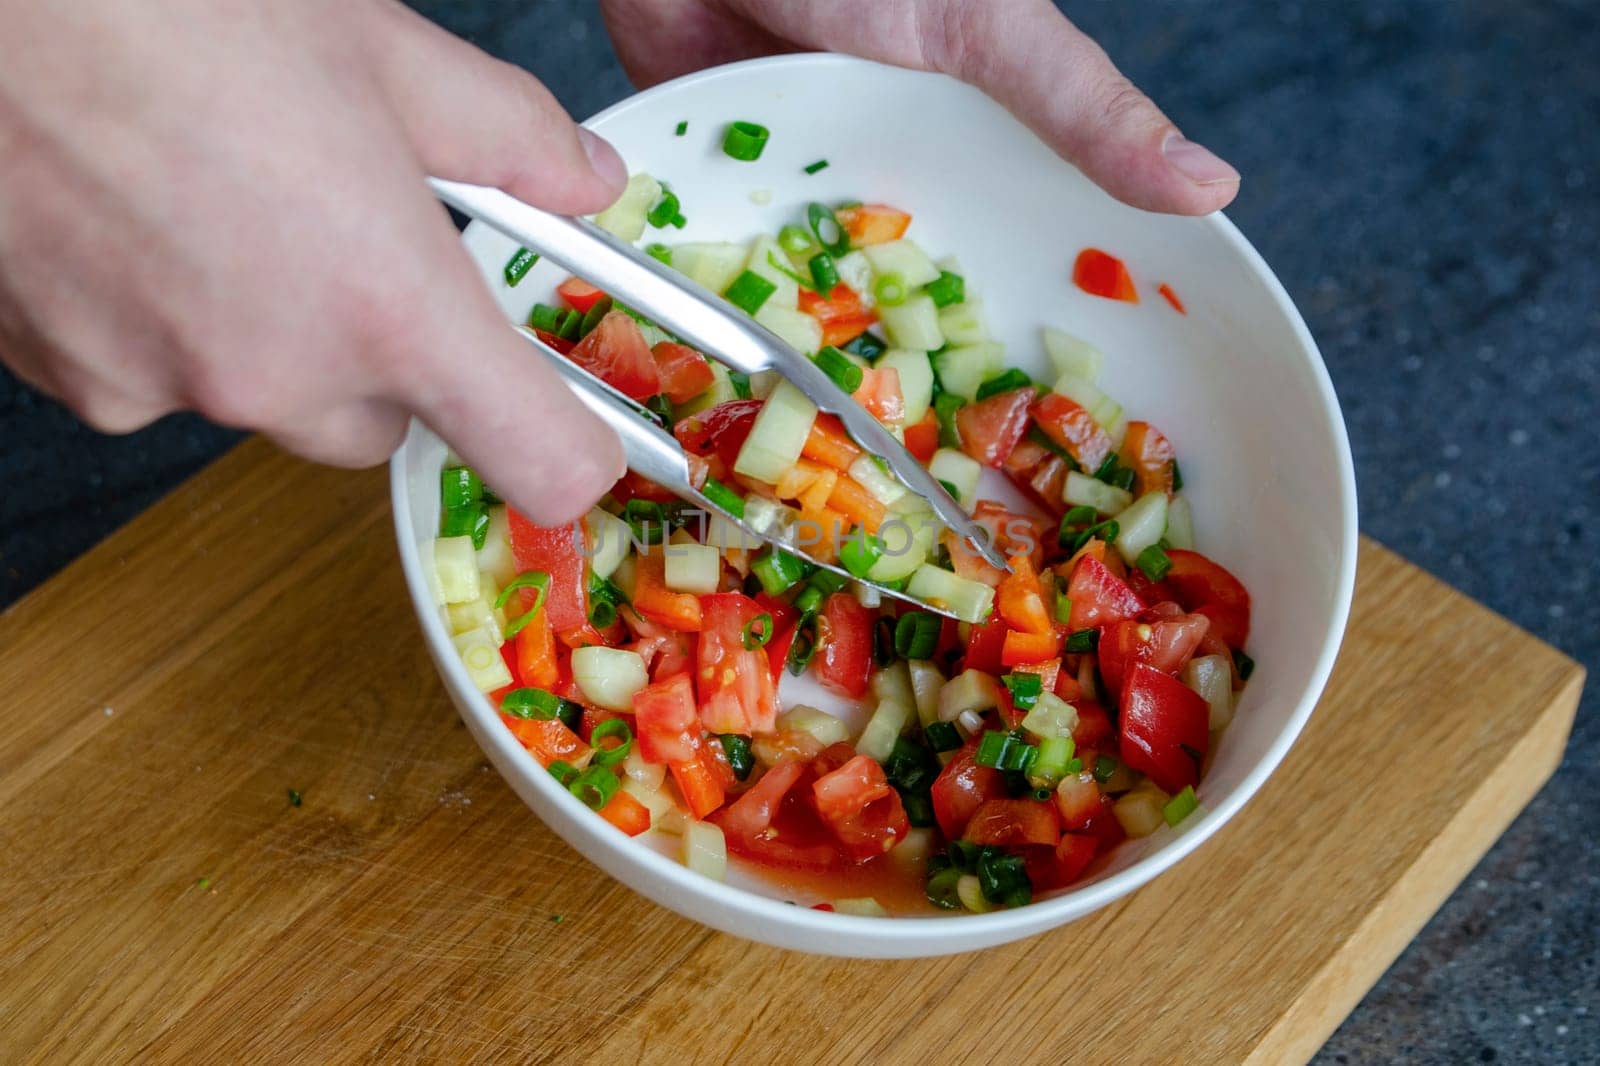 The process of mixing salad. Close-up of a man's hands stirring a salad mixture. Hands stir the salad so that the ingredients are distributed throughout the plate. by SERSOL